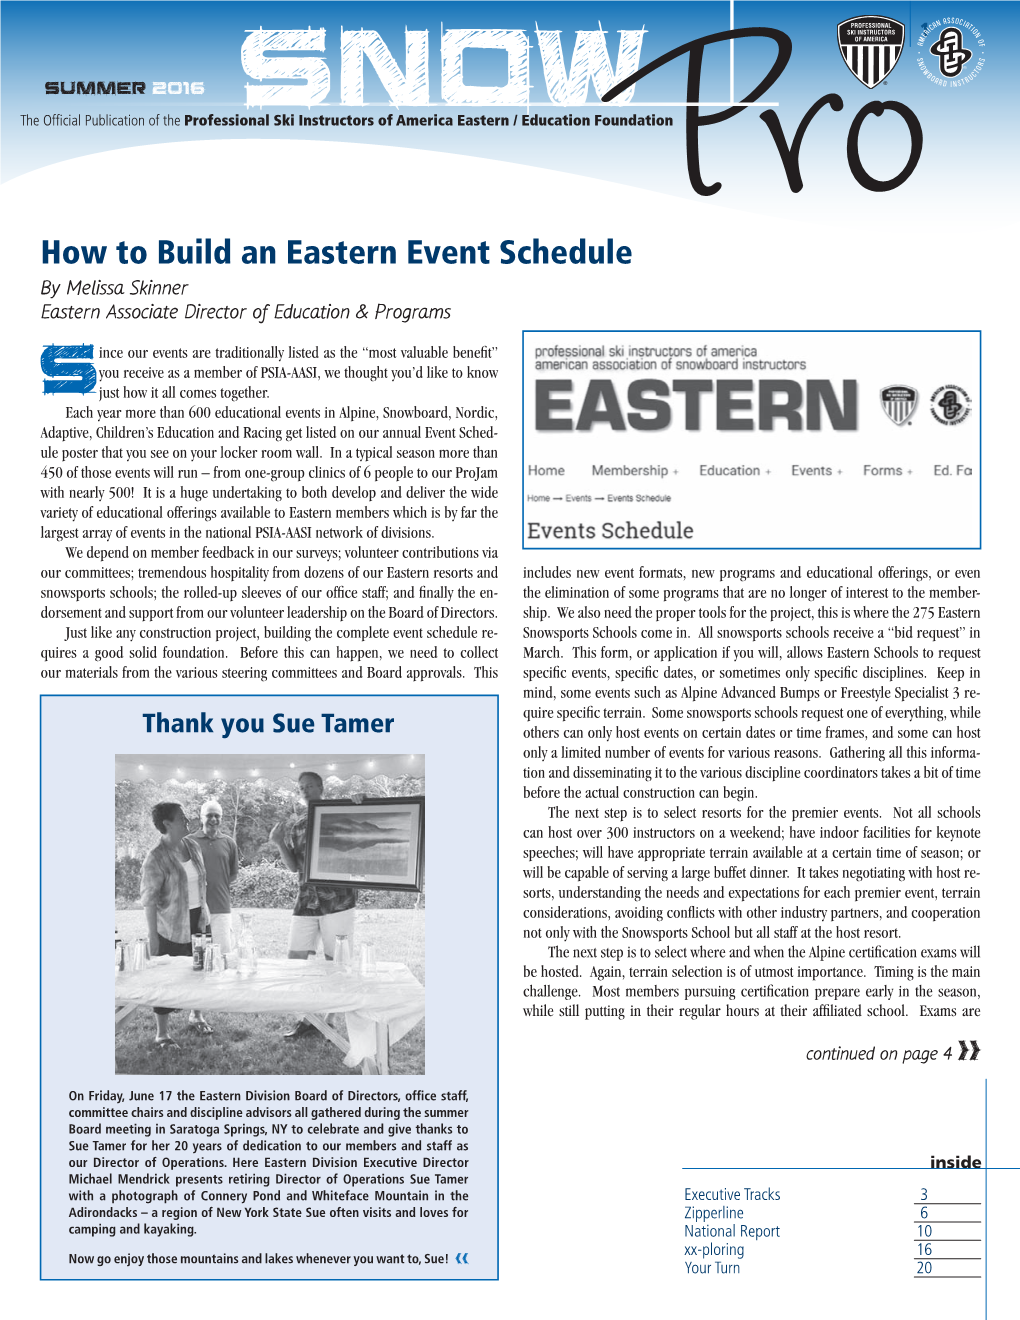 How to Build an Eastern Event Schedule by Melissa Skinner Eastern Associate Director of Education & Programs